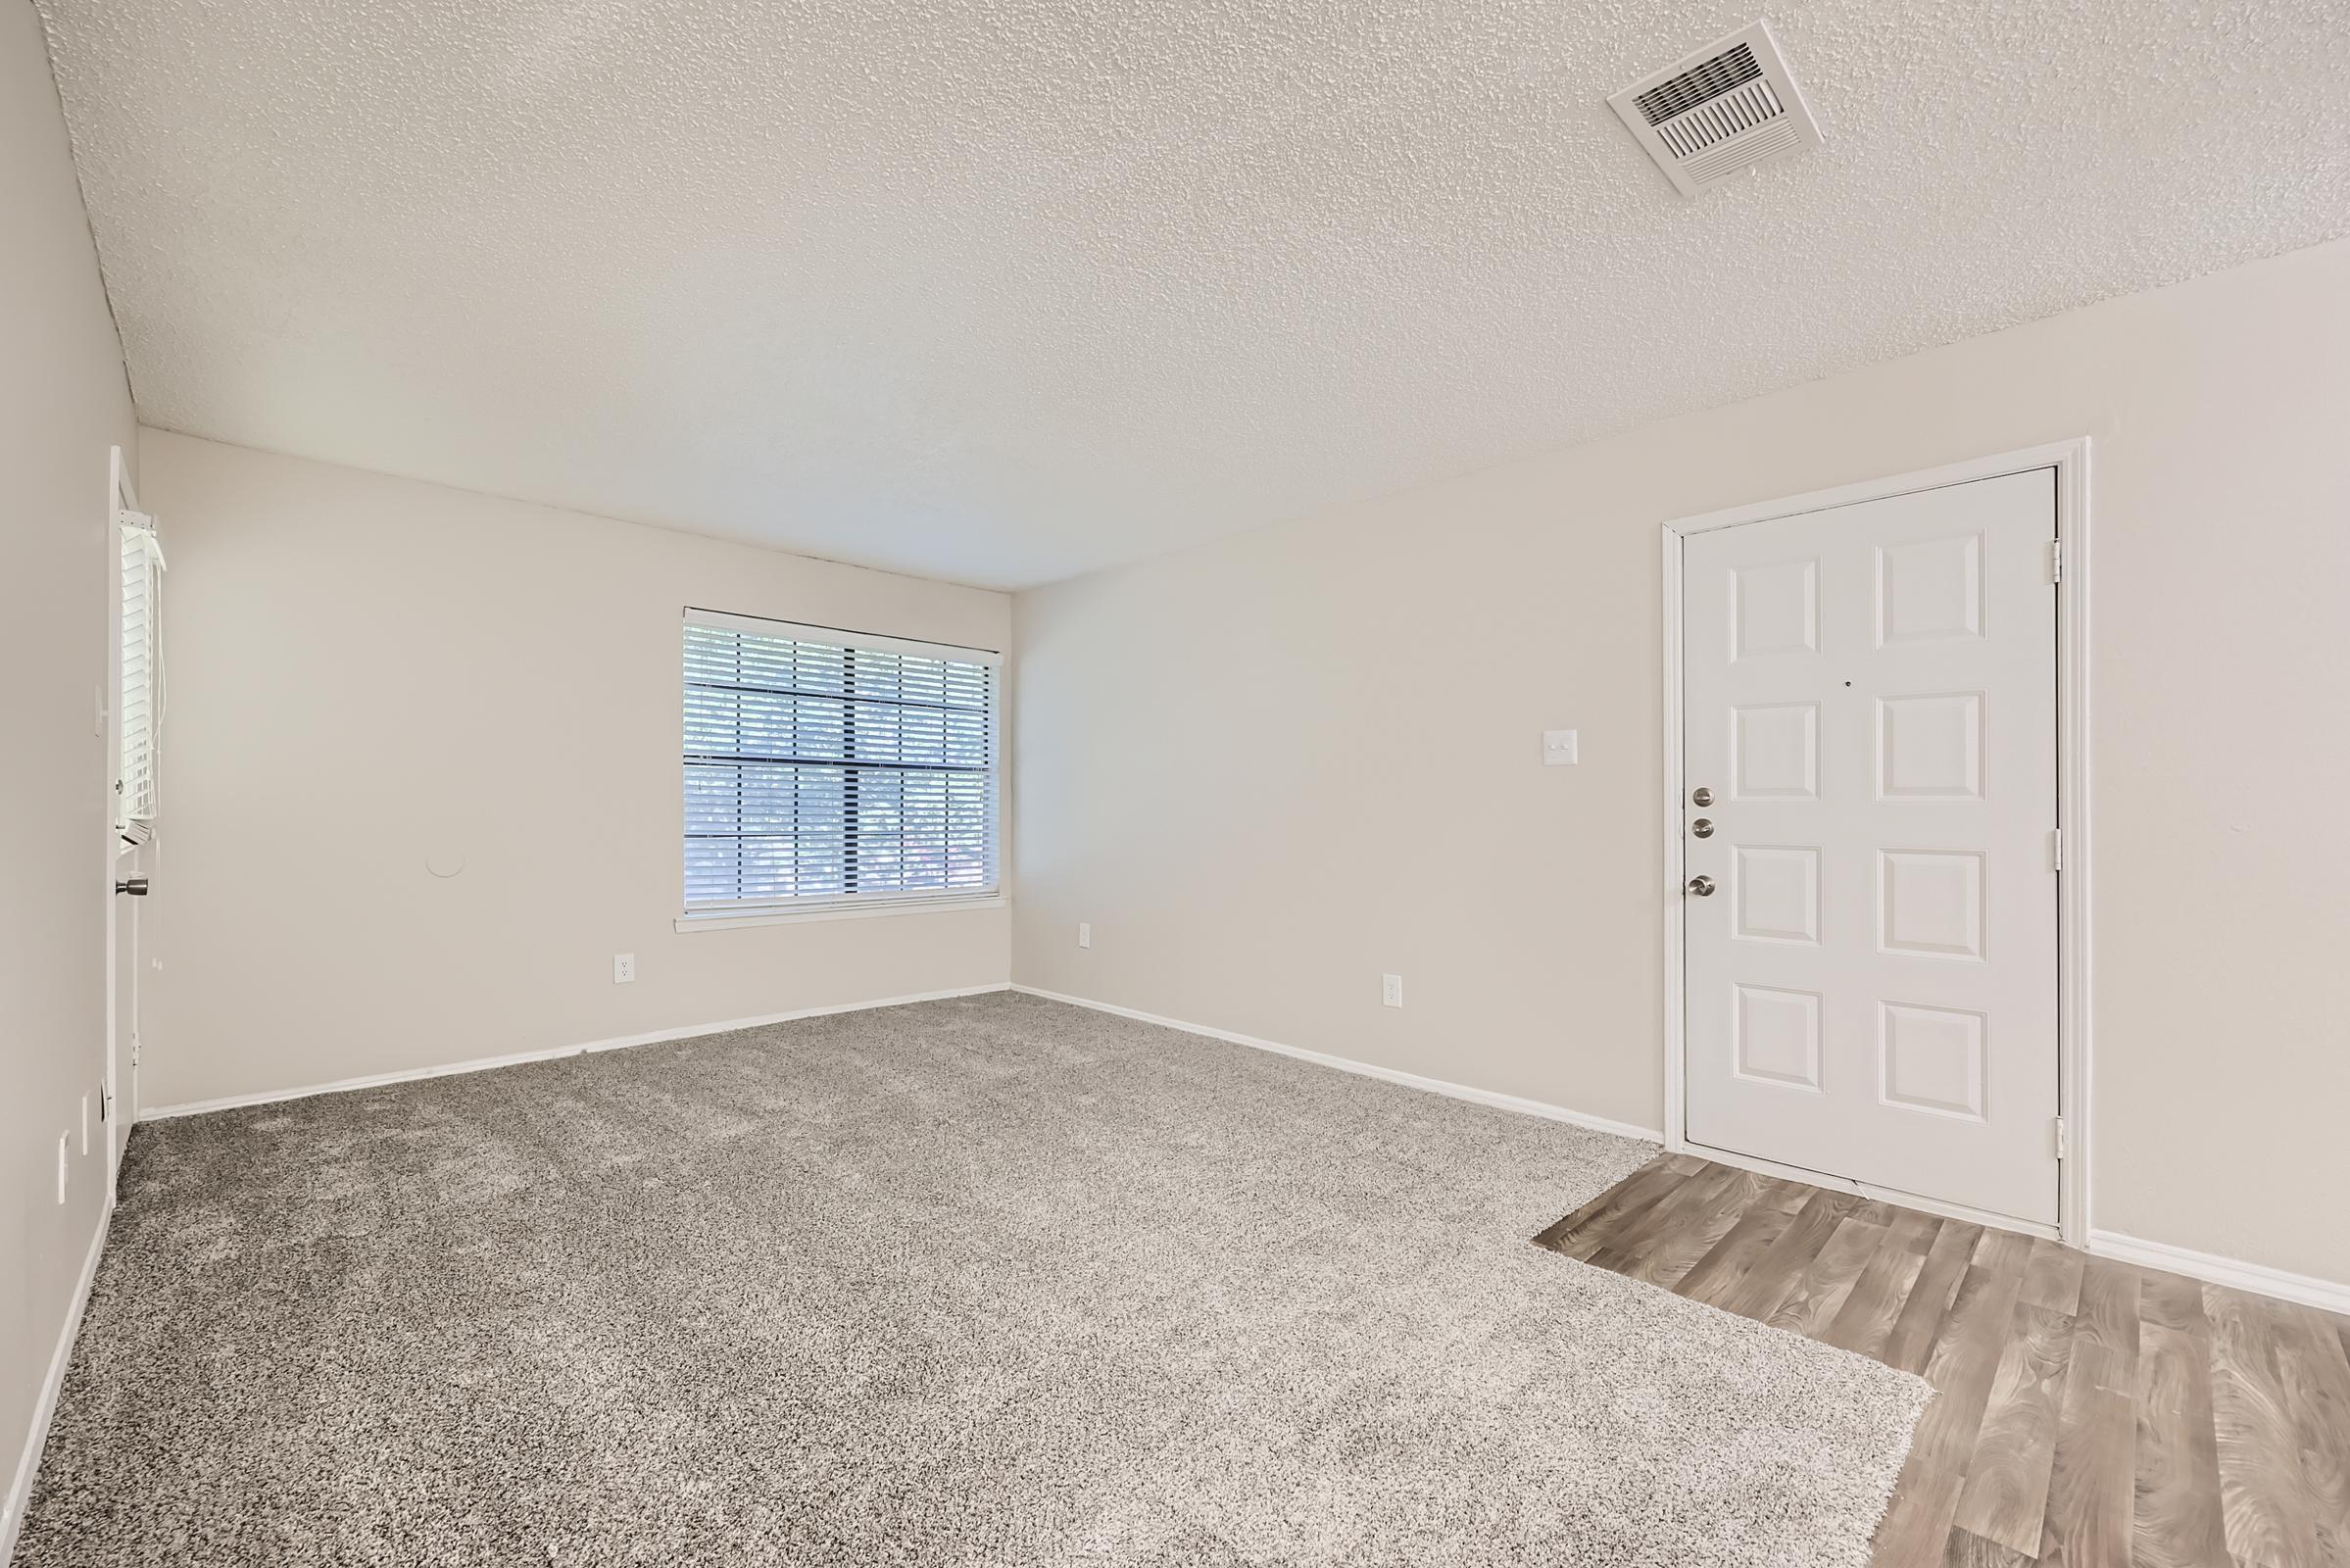 A carpeted living room at Rise Oak Creek near the dining area with wood-style flooring.